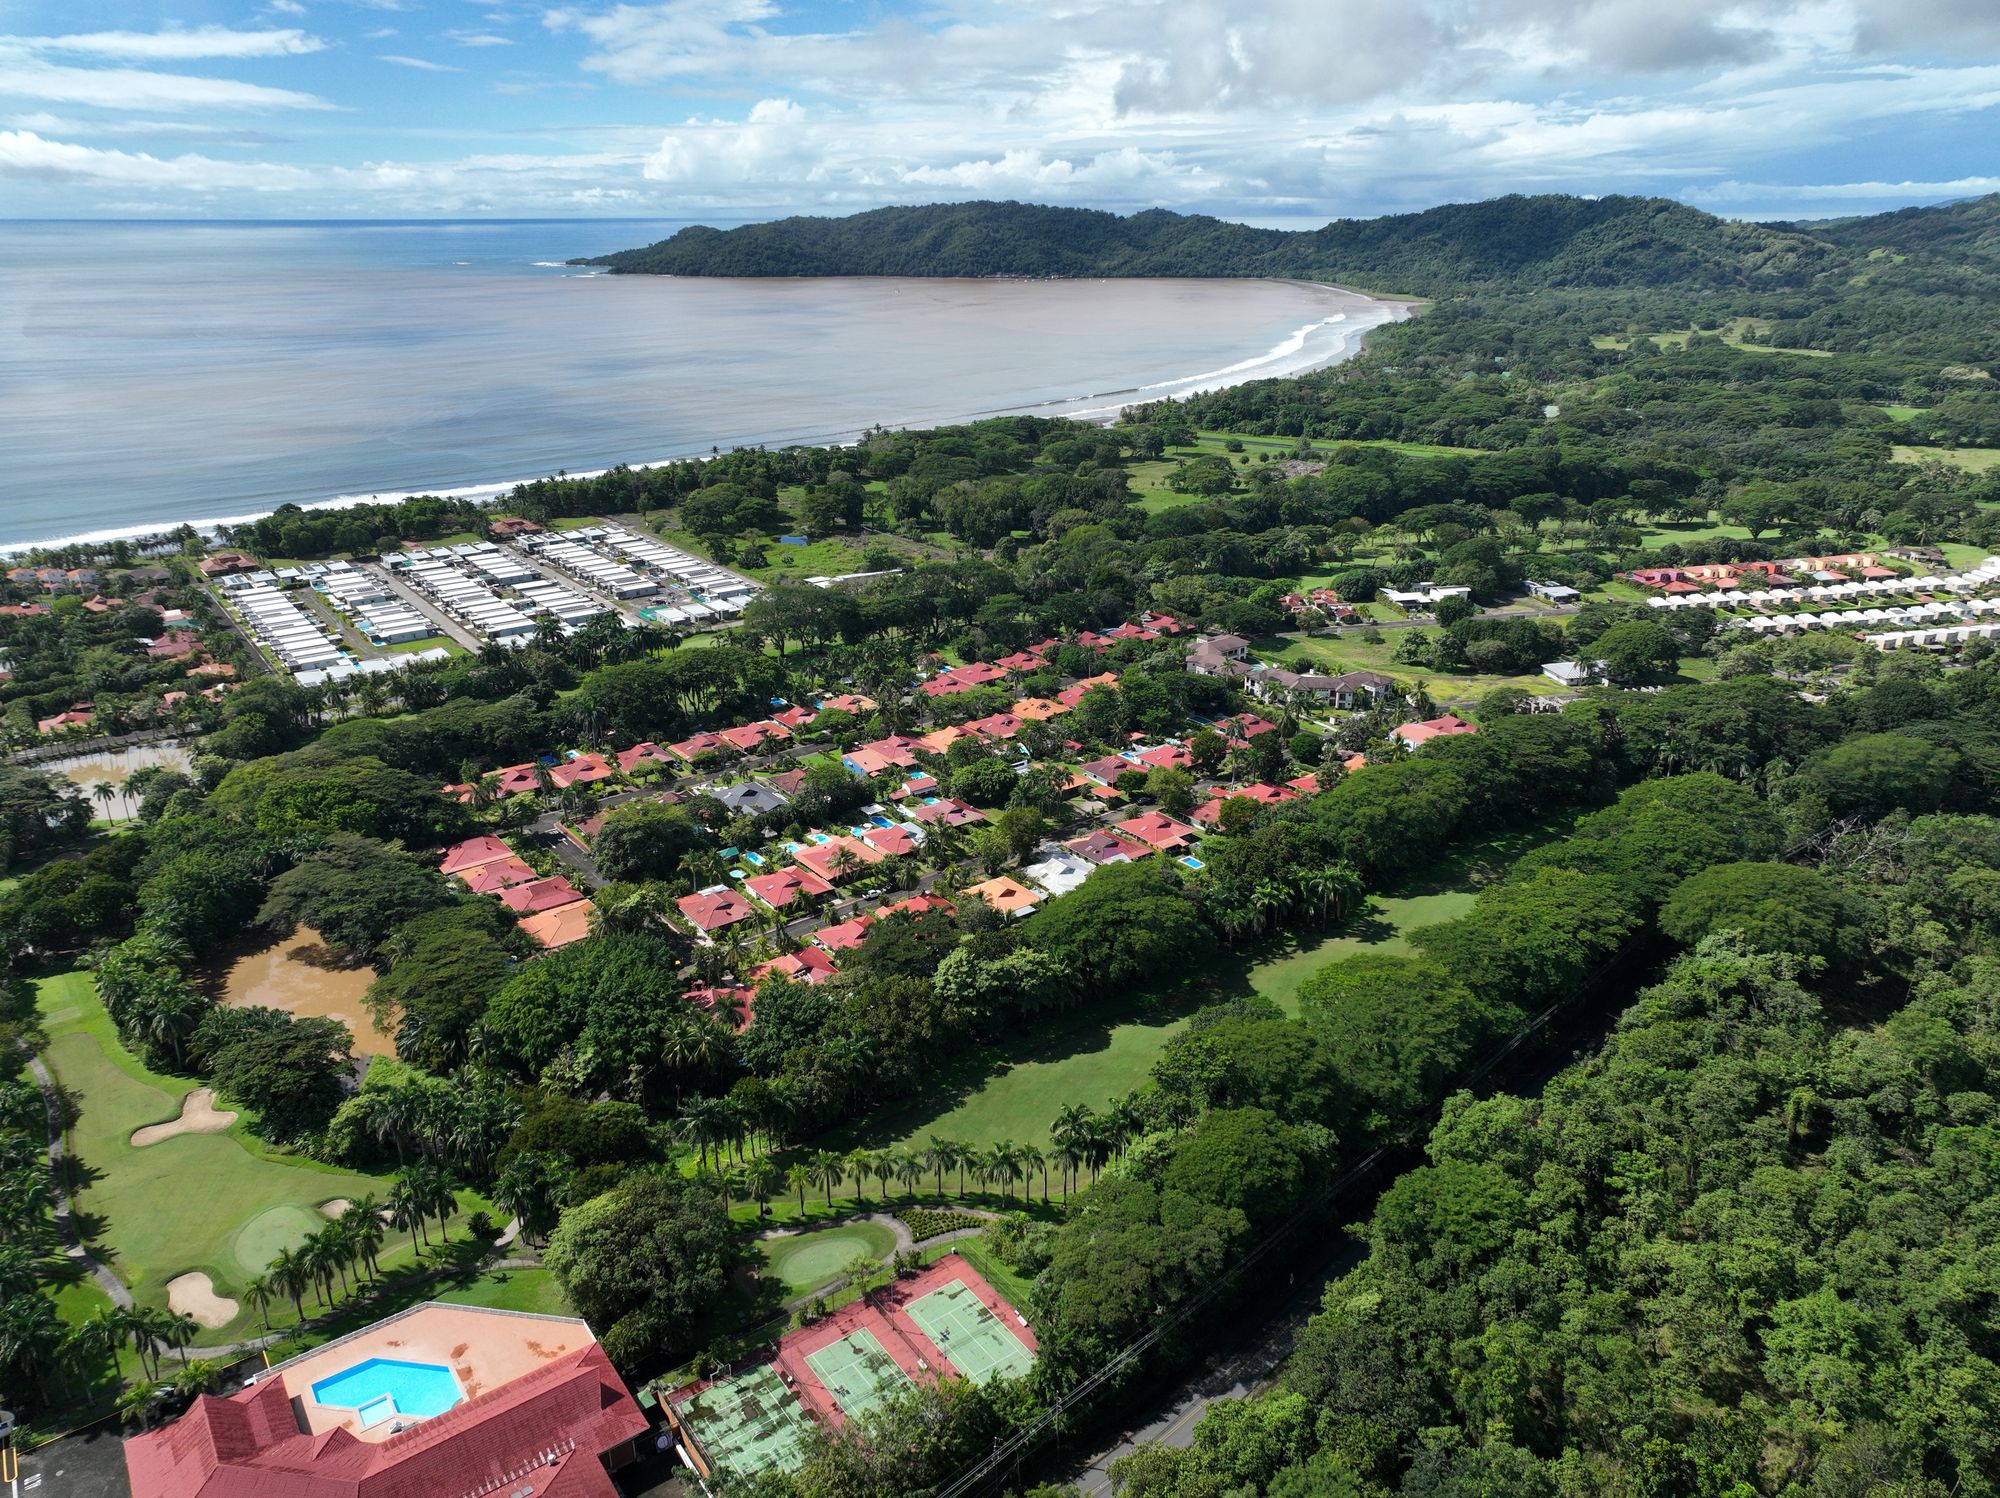 A photo of an Aerial view of Tambor, Costa Rica.